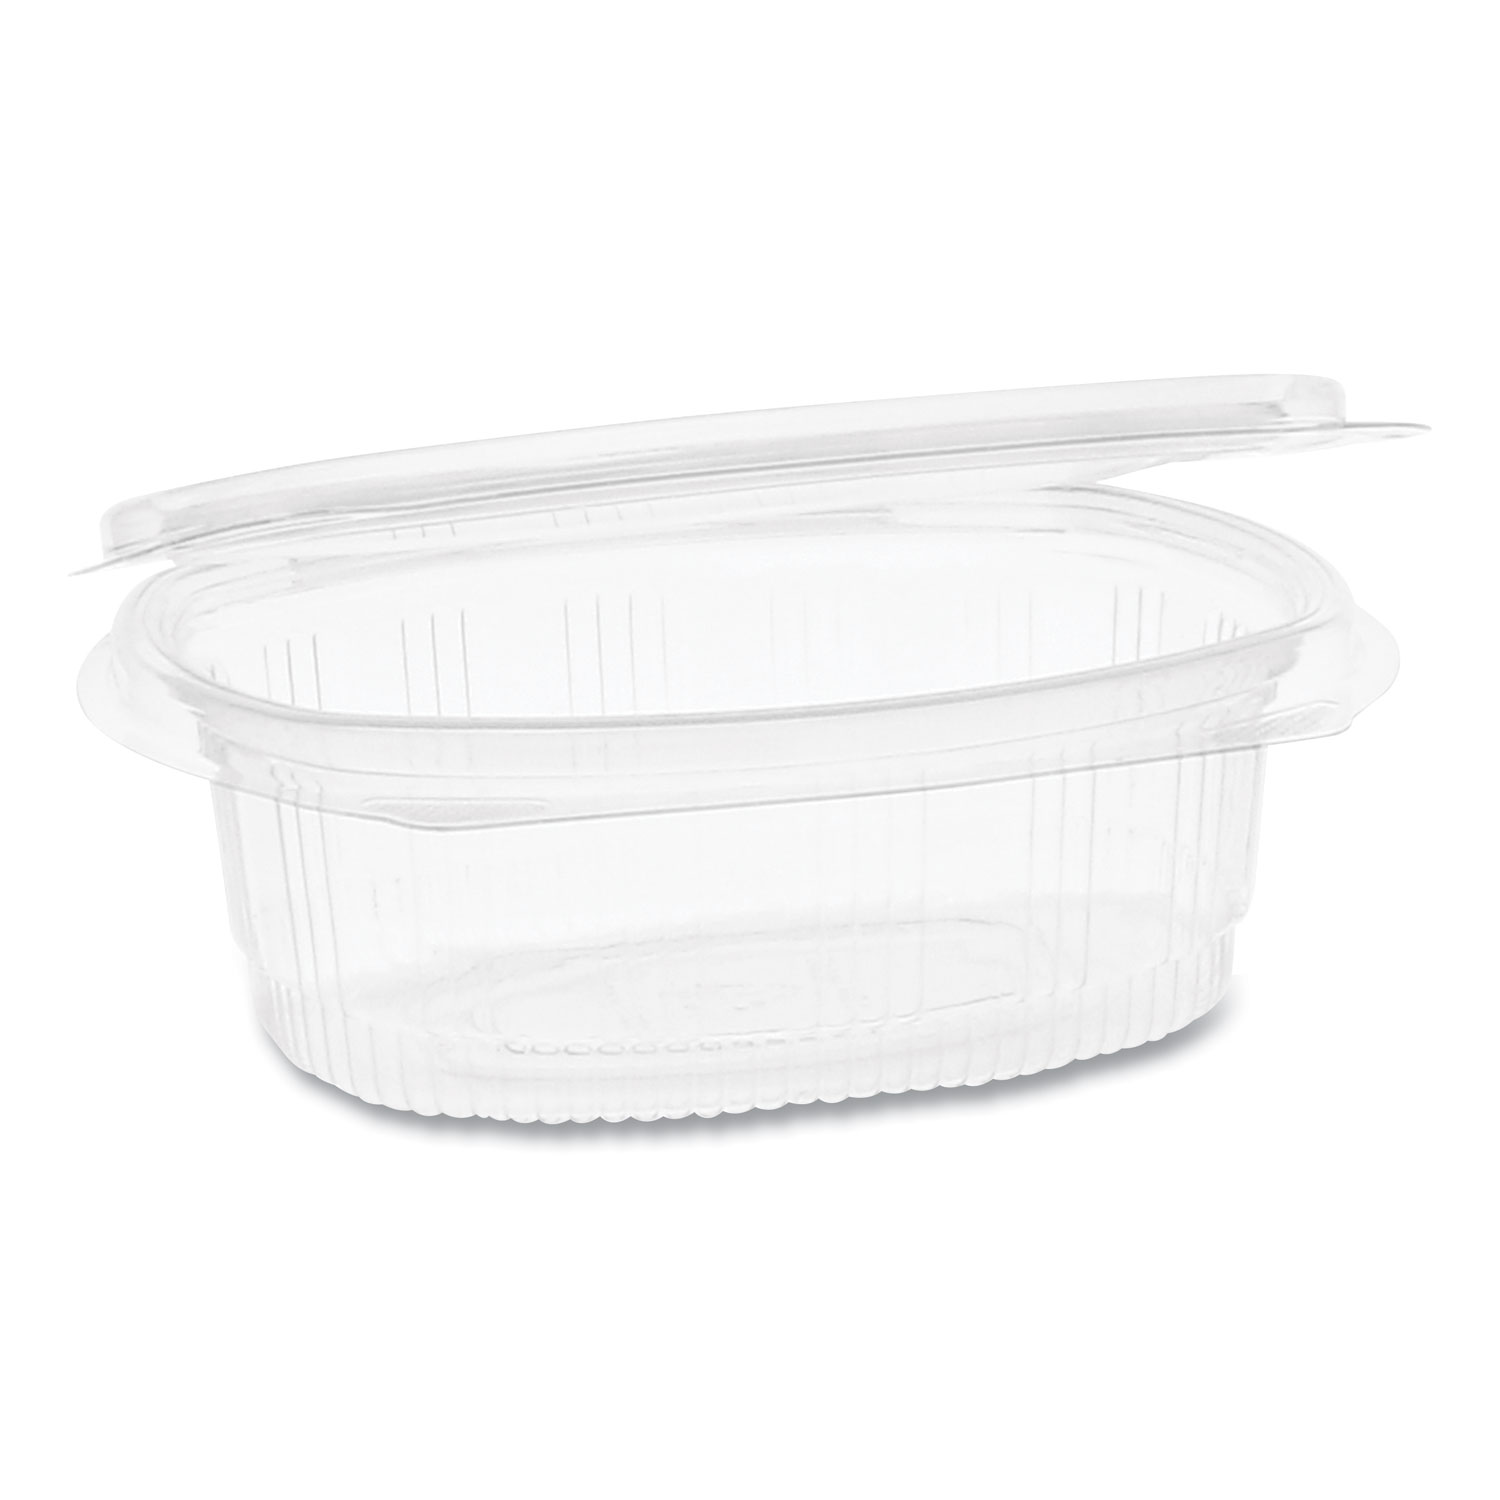 Pactiv EarthChoice PET Hinged Lid Deli Container, 4.92 x 5.87 x 1.89, 12 oz, 1-Compartment, Clear, 200/Carton